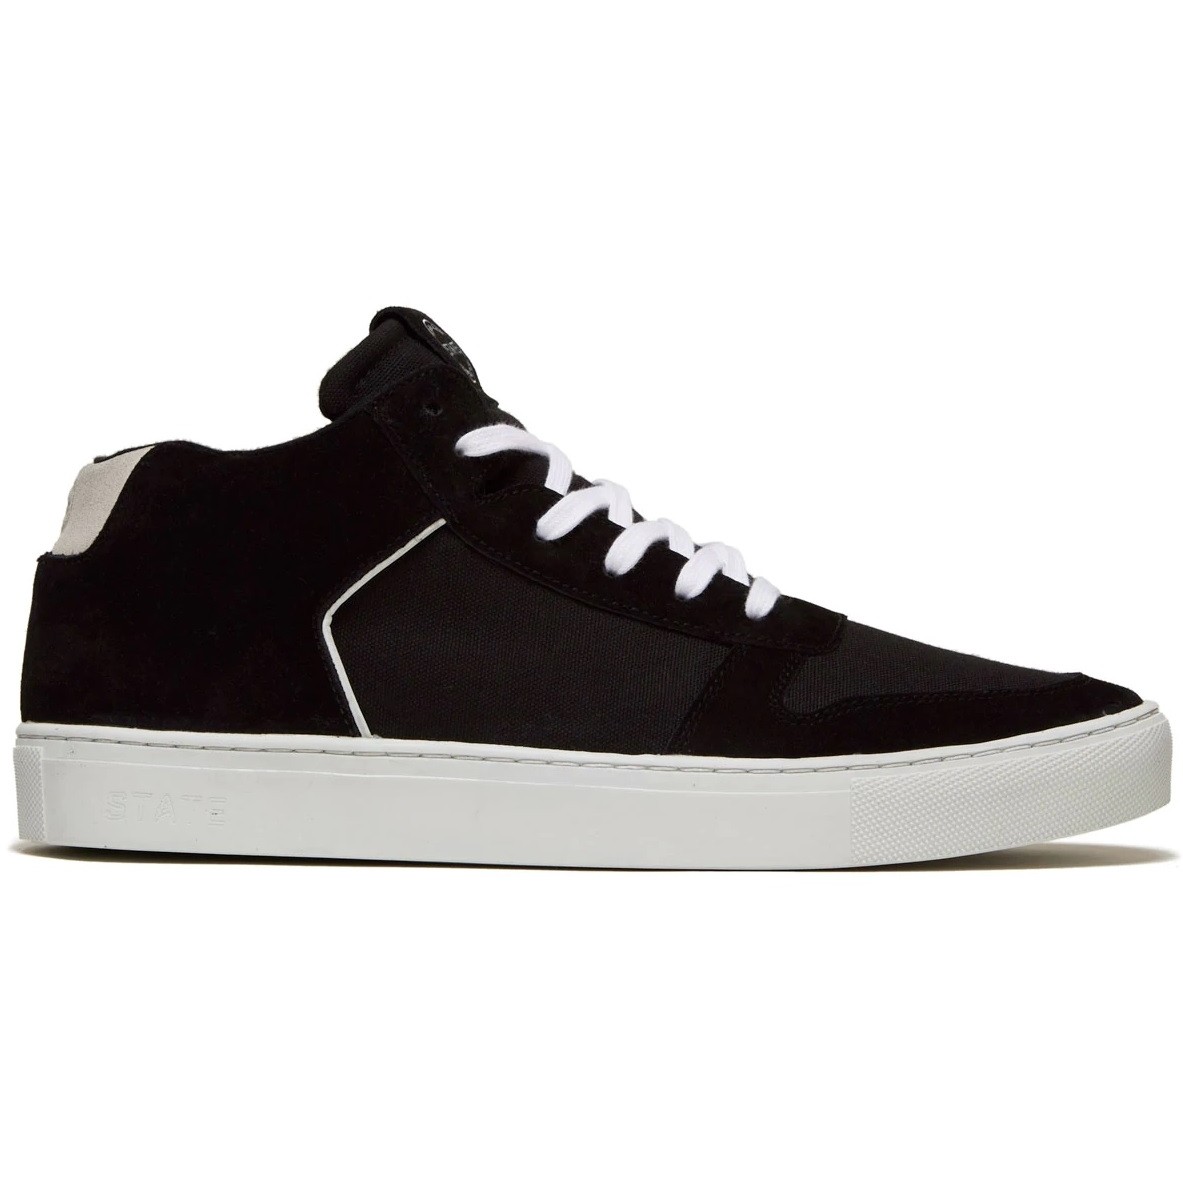 Sterling (Black/White Suede)